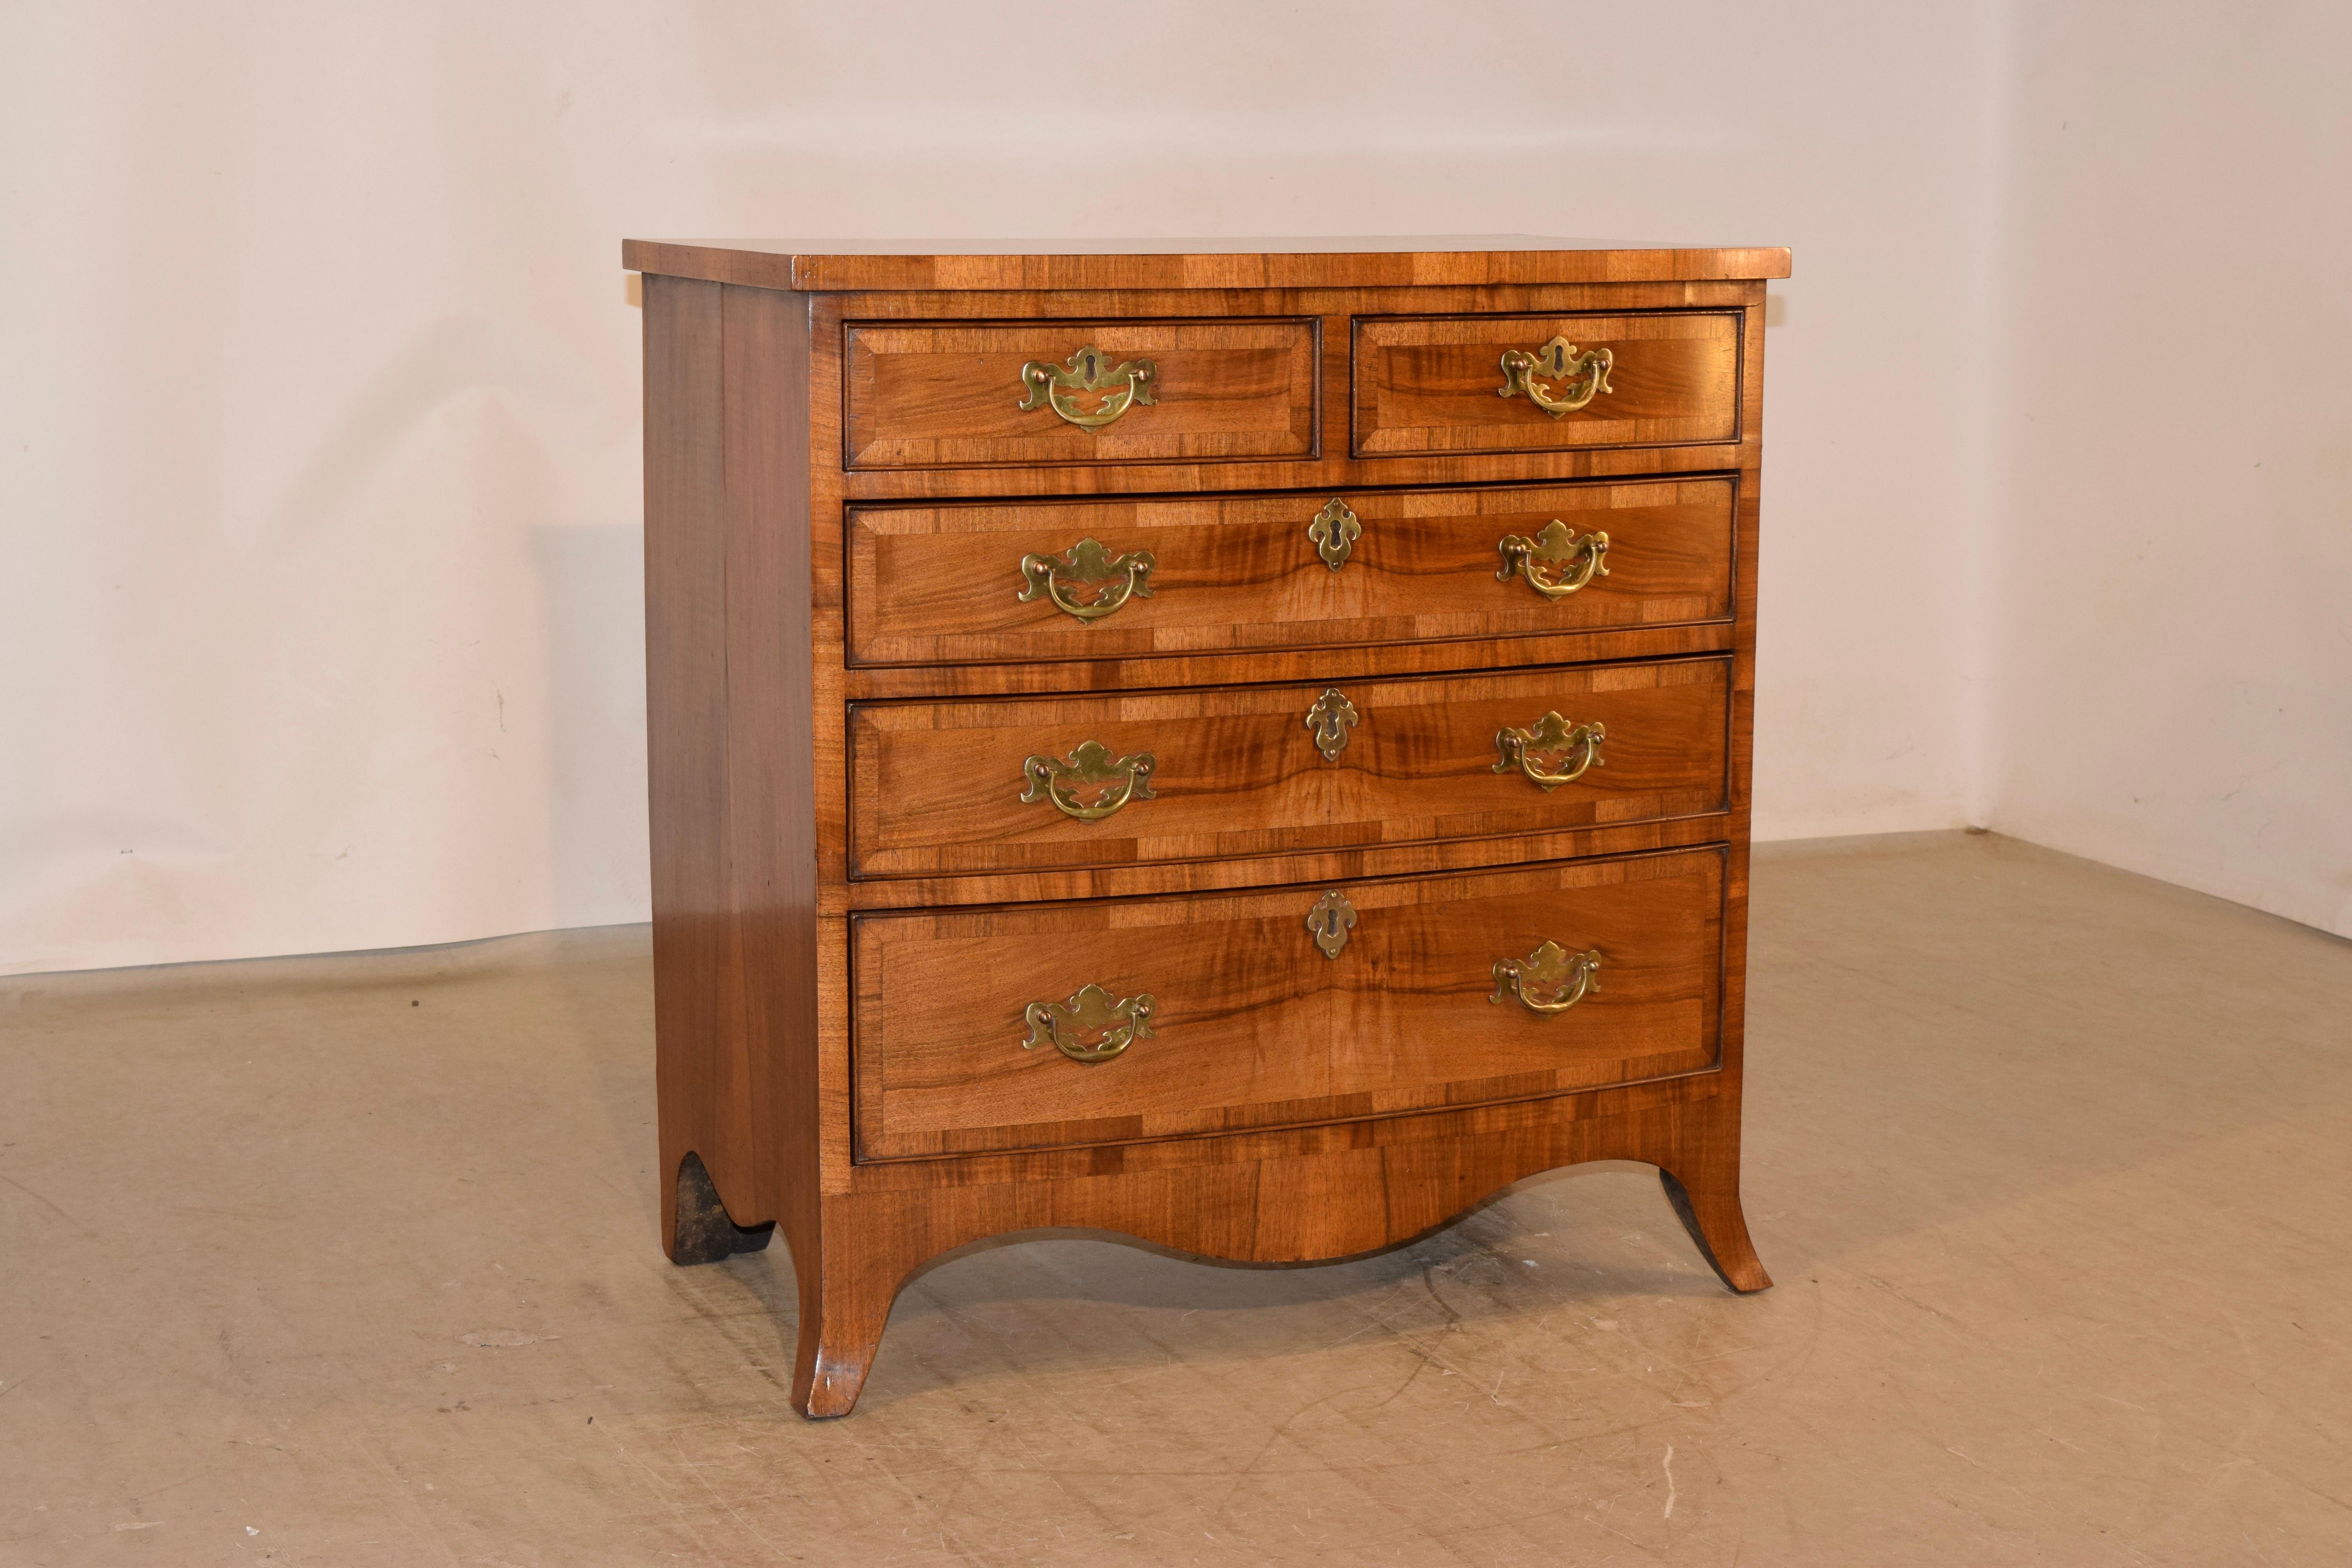 Fantastic Edwardian small chest of drawers from England made from rosewood and walnut. The top is book matched rosewood, banded with a wonderfully grained rosewood border. The sides are also made from book matched rosewood for added detail to this